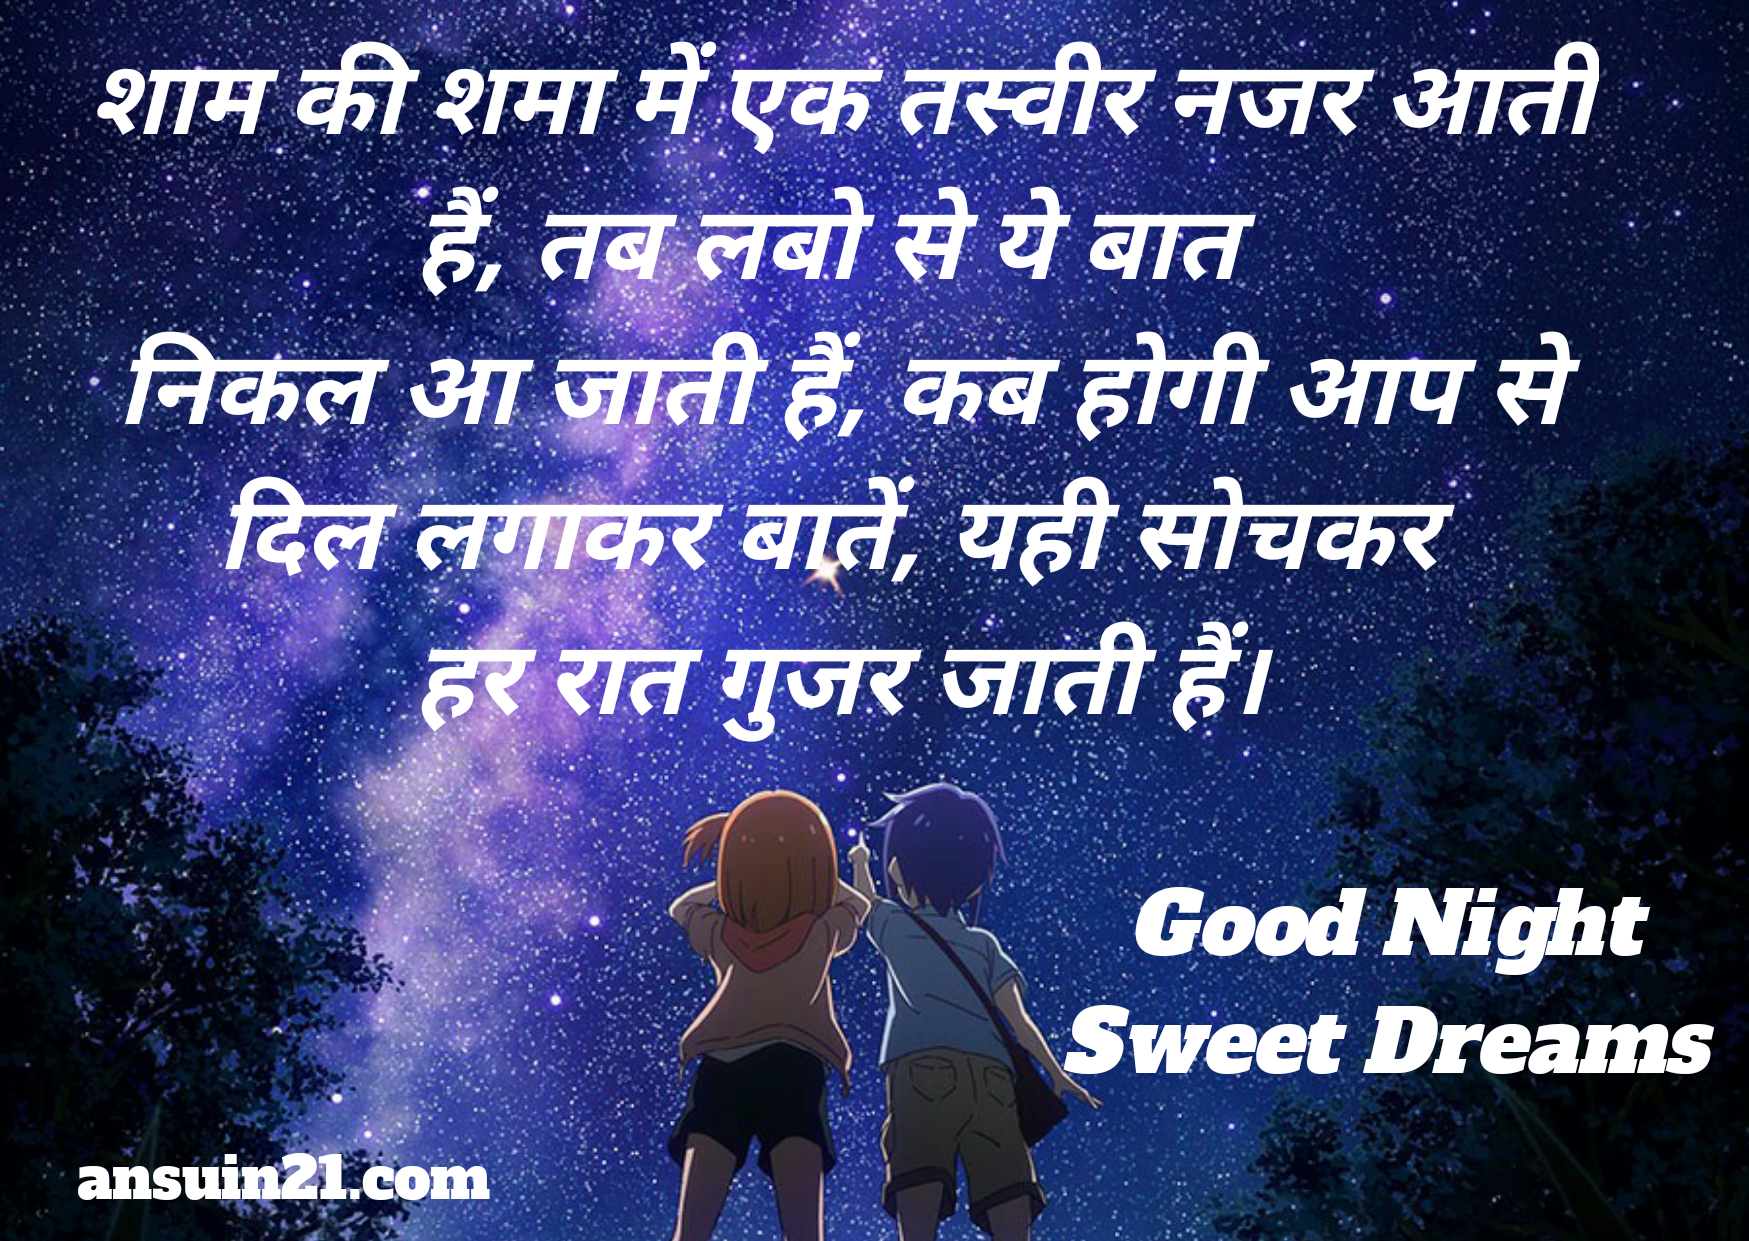 Best Good Night Hindi wishes, Status, sms, Images, best romantic good night hindi wishes, quotes, images,